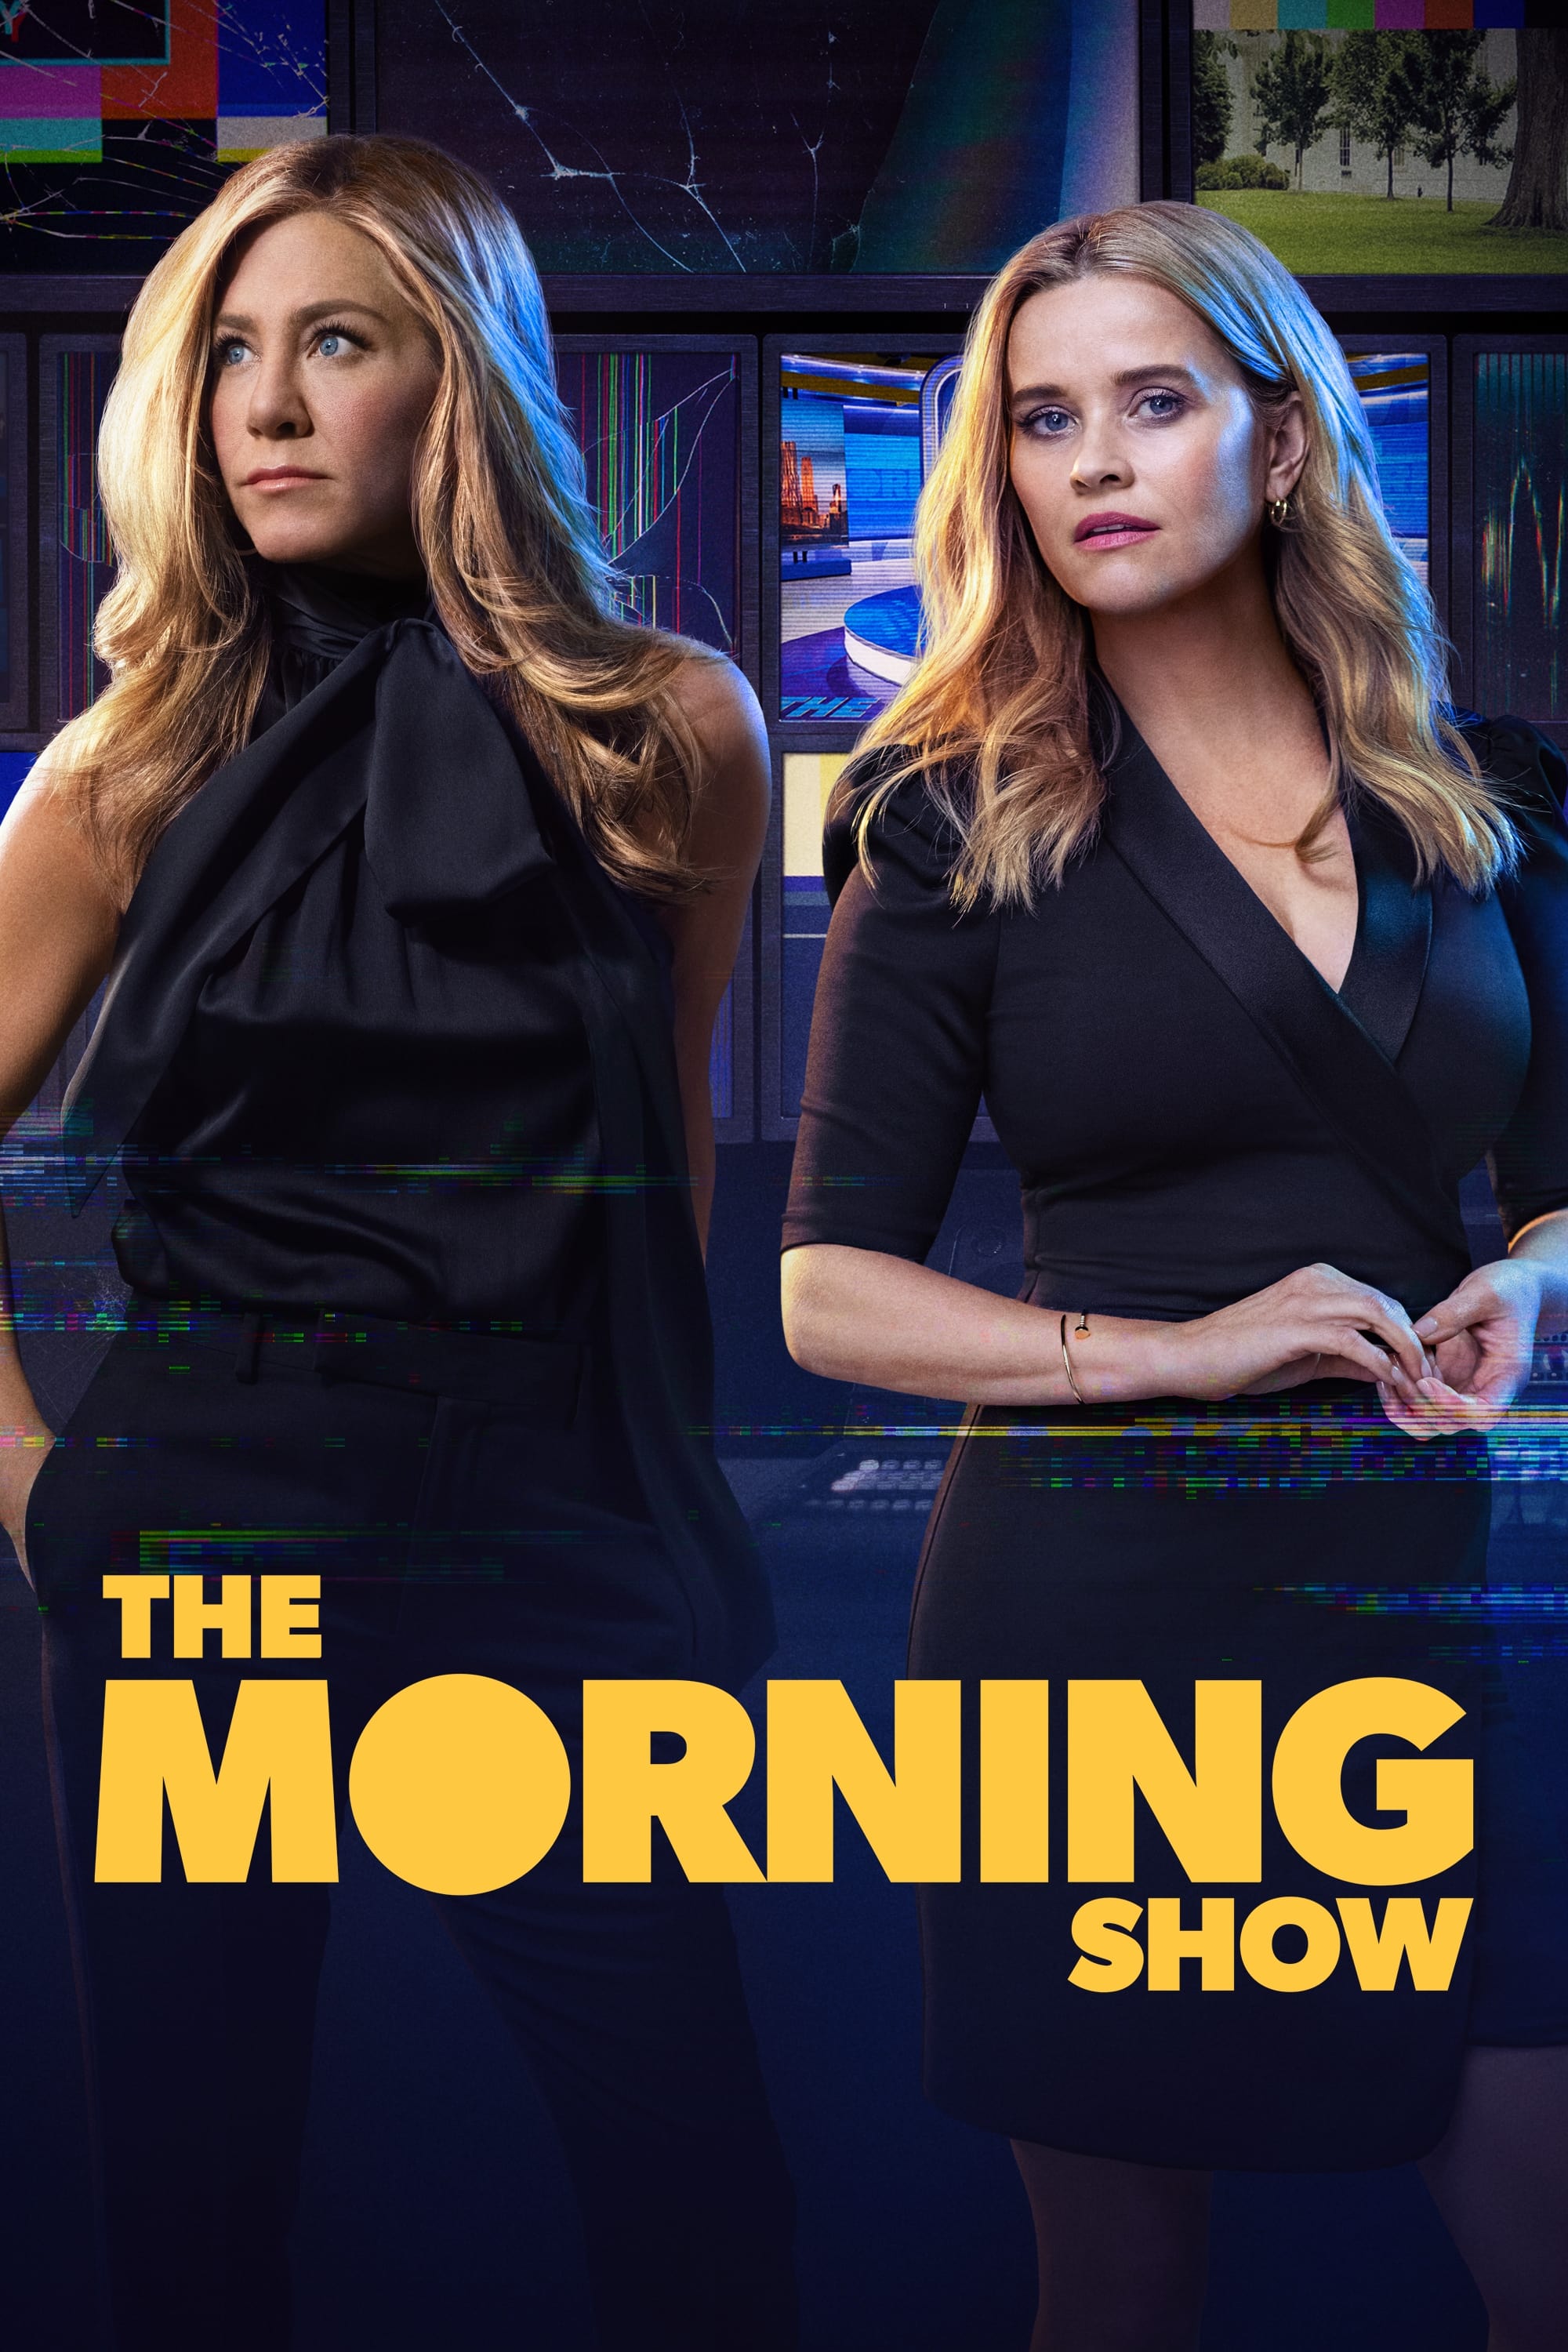 The Morning Show rating